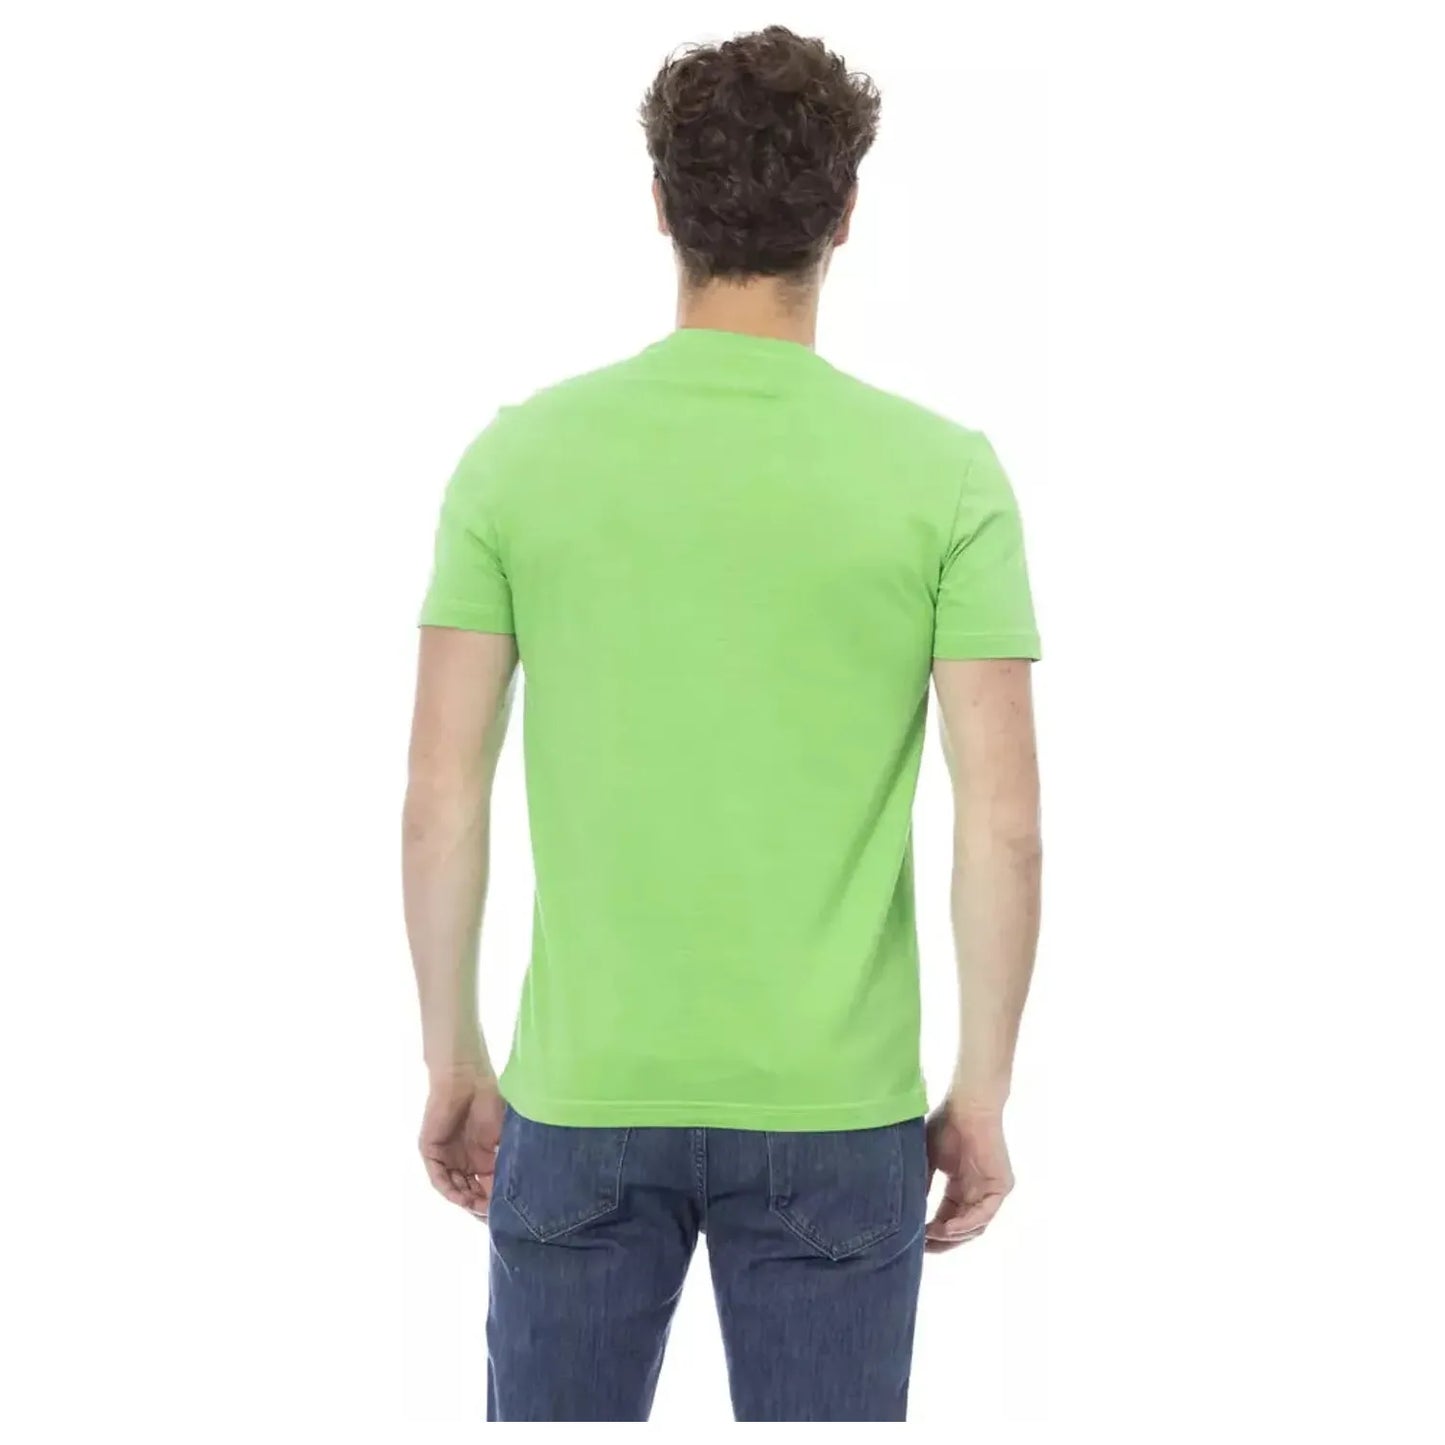 Baldinini Trend Green Cotton Tee with Chic Front Print green-cotton-t-shirt-61